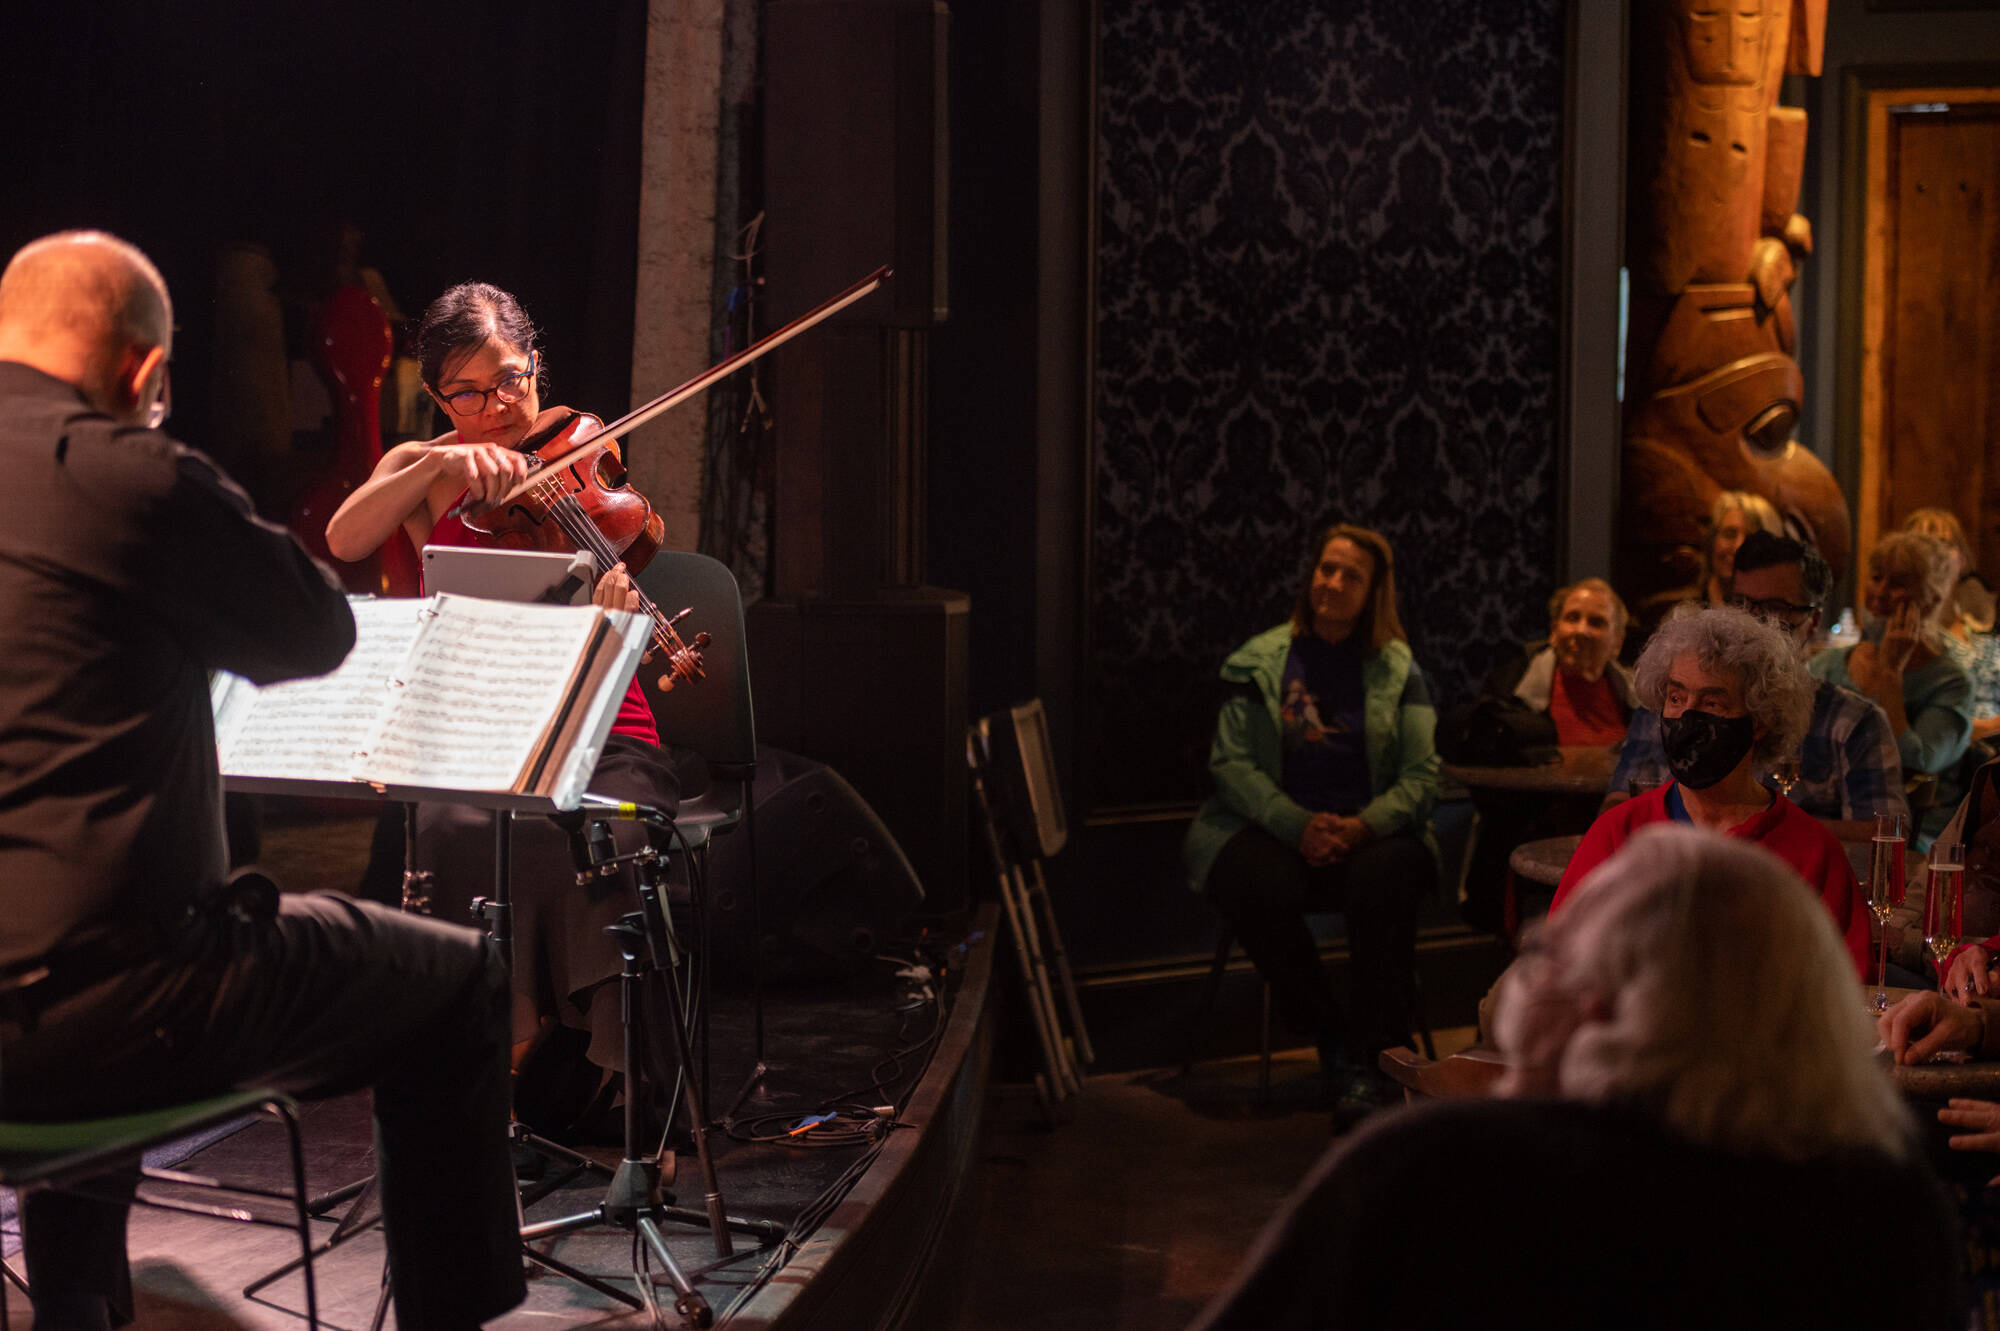 The Arianna String Quartet performs a “Classical Cocktails” concert at the recently reopened Crystal Saloon last Wednesday night.